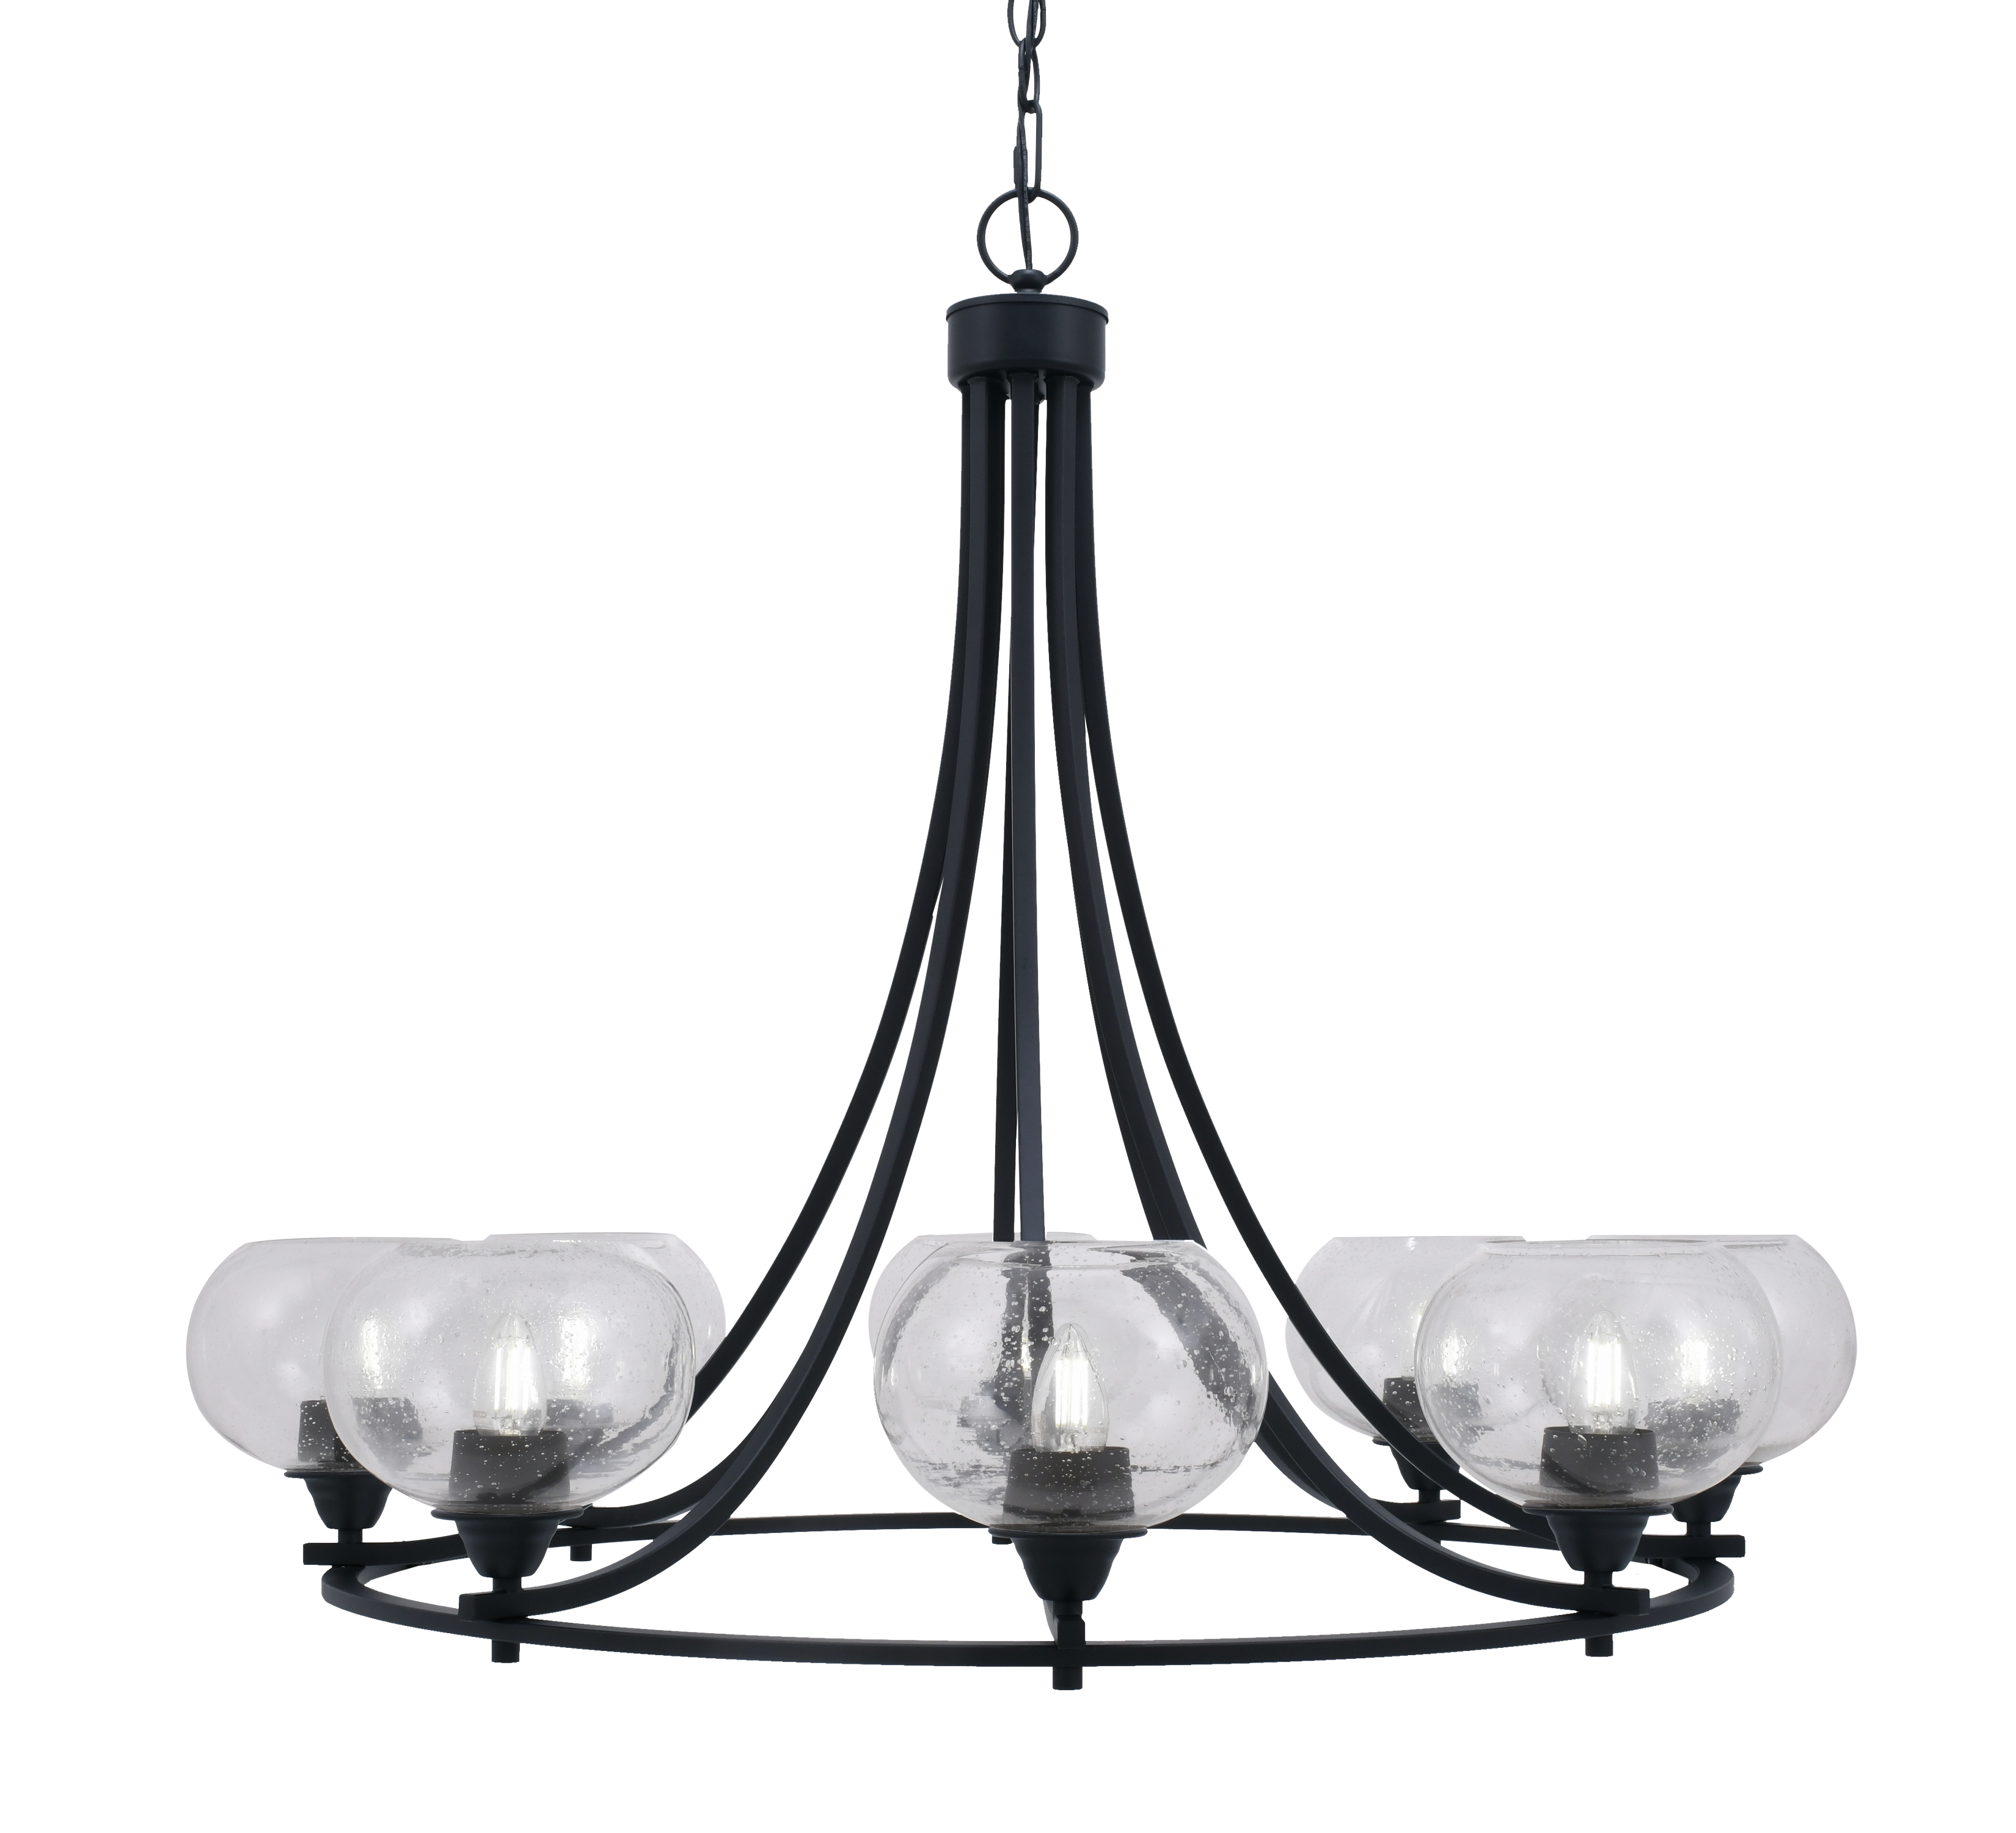 Toltec Lighting 3408-MB-202 Paramount Uplight, 8 Light, Chandelier In Matte Black Finish With 7" Clear Bubble Glass